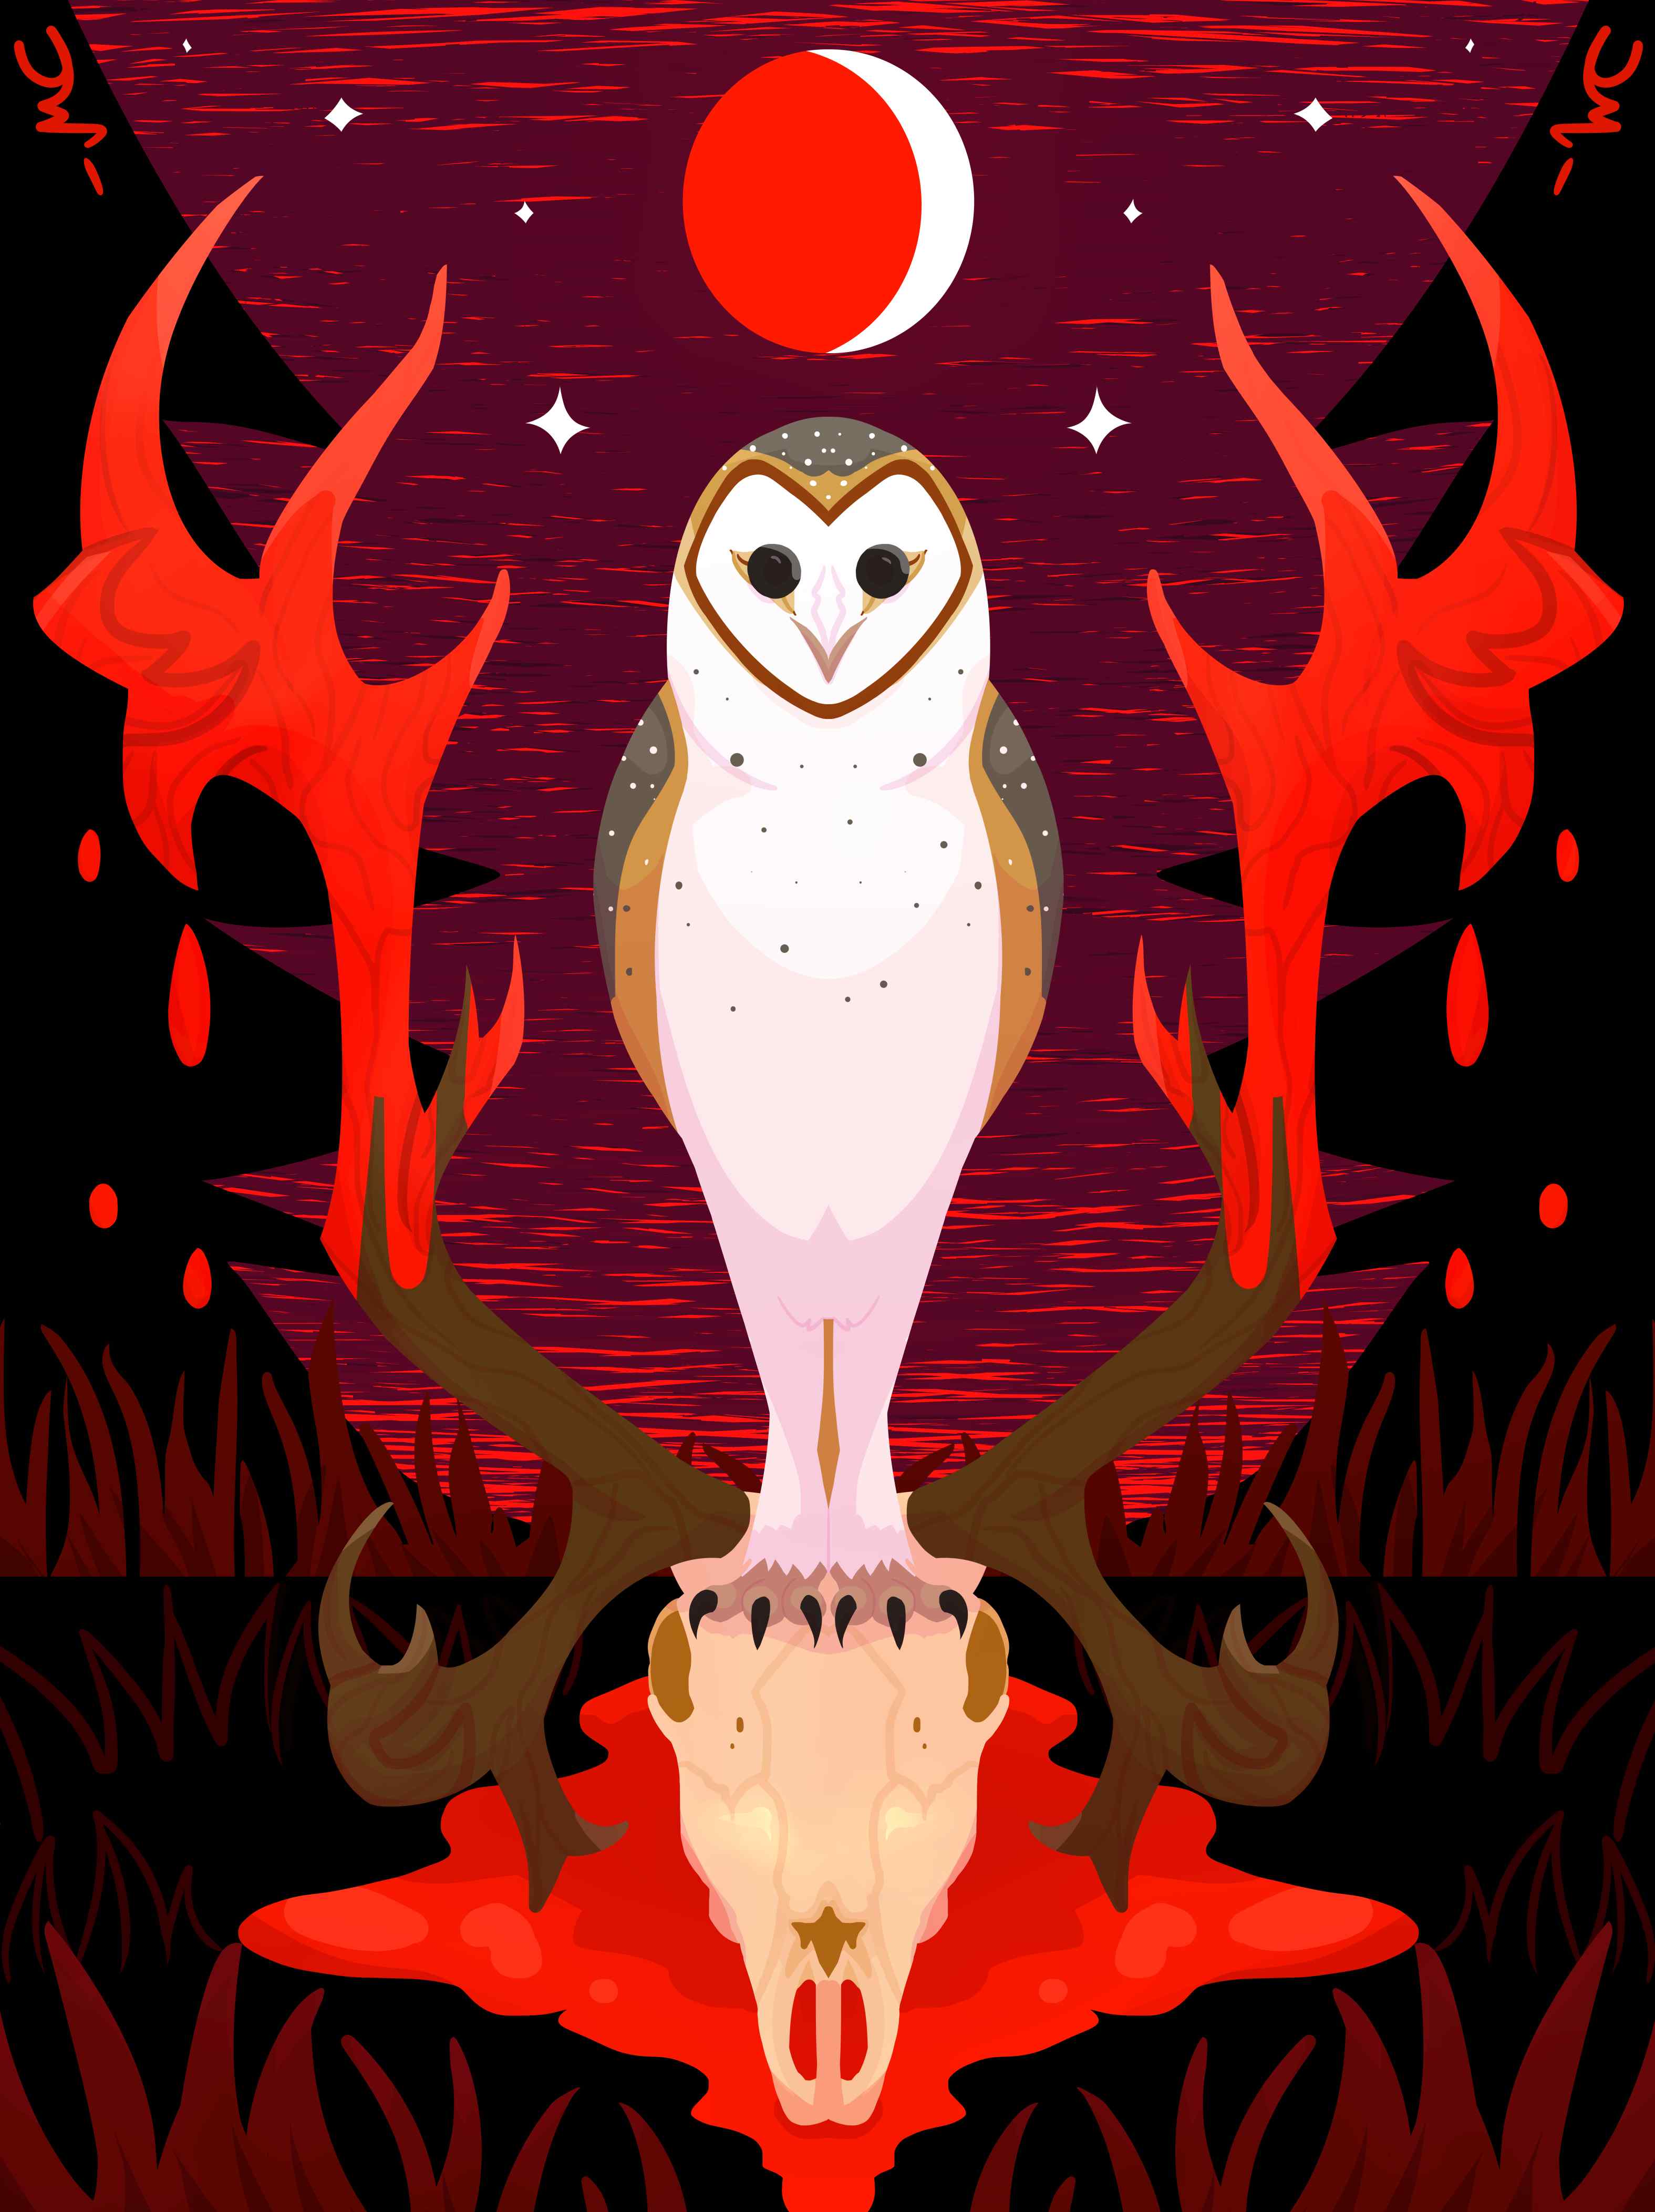 A barn owl sat atop a caribou skull. Above it is a crescent moon. There is blood dripping from the caribou's antlers and a pool of blood beneath it. The grass and trees are red and black, and the sky is red and purple. The image is symmetrical and lineless.